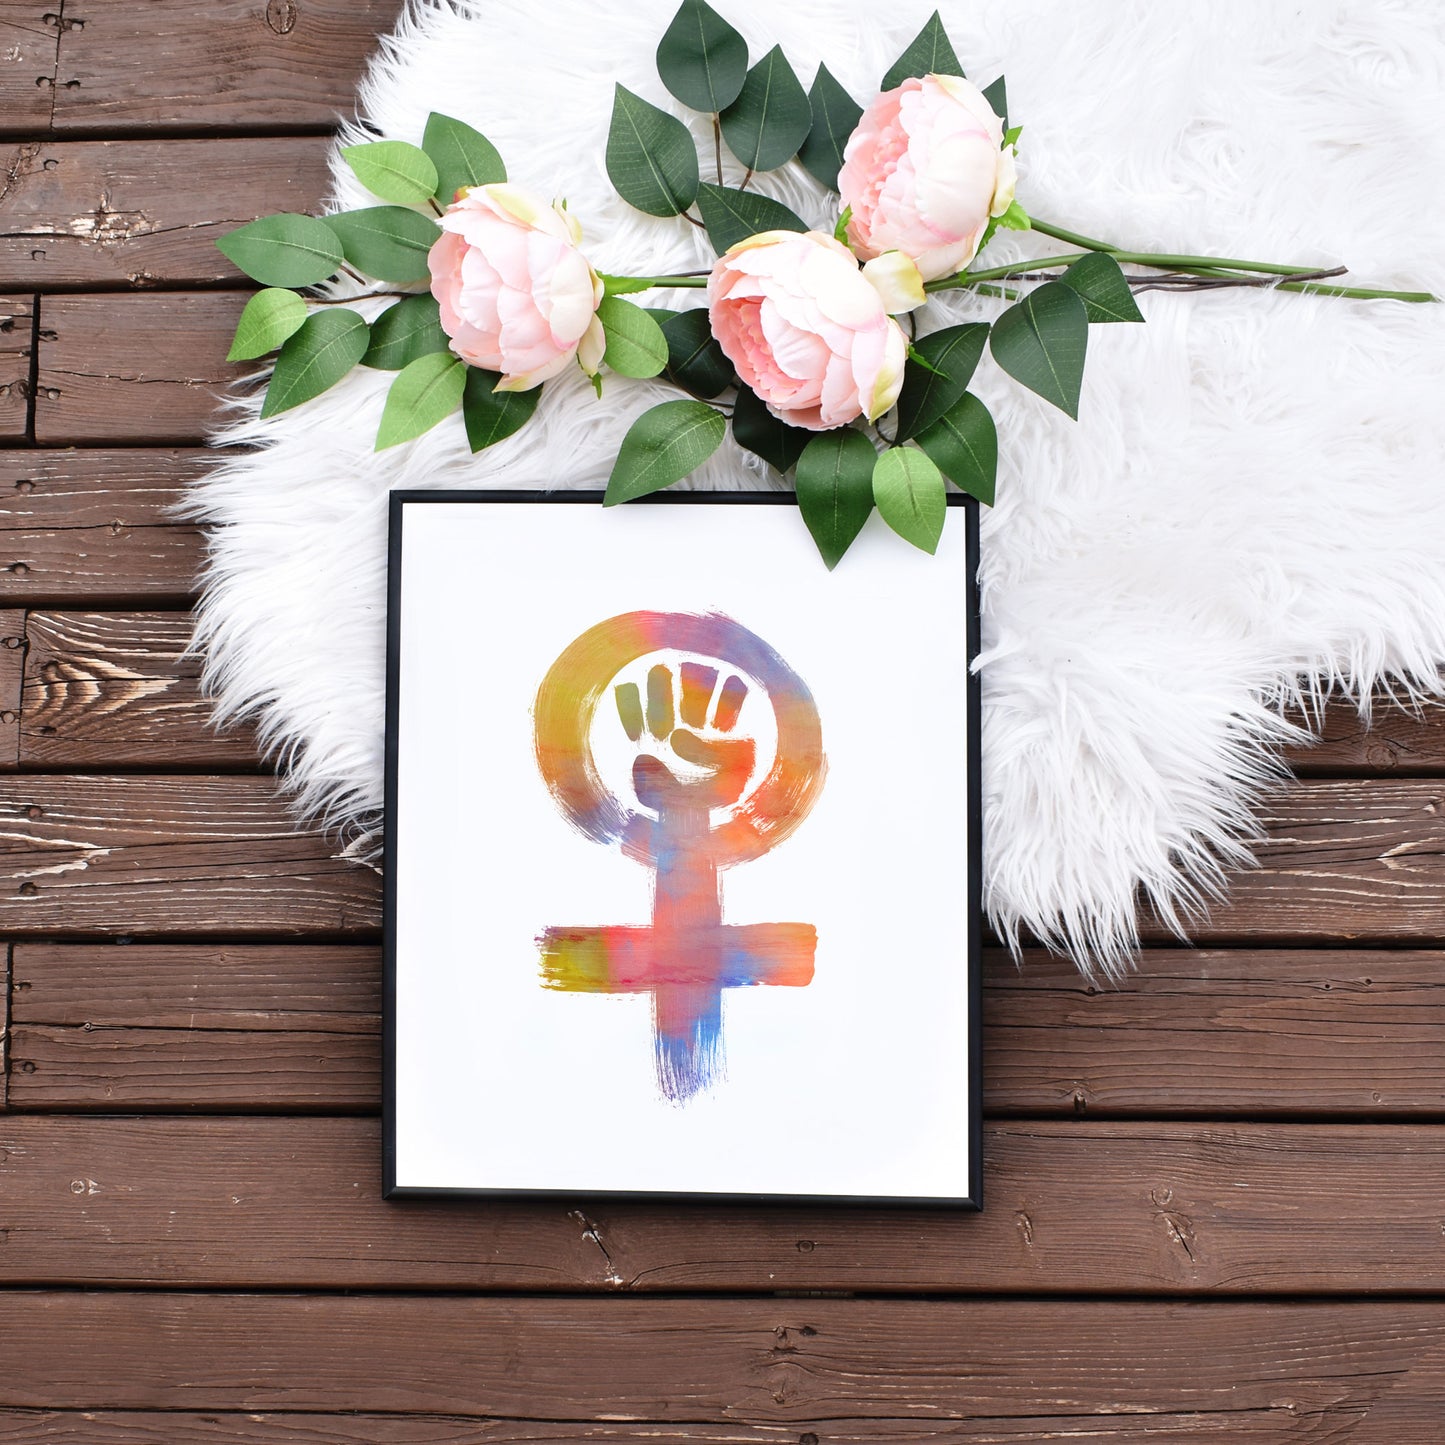 Feminist Clenched Fist Printable Wall Art by Playful Pixie Studio